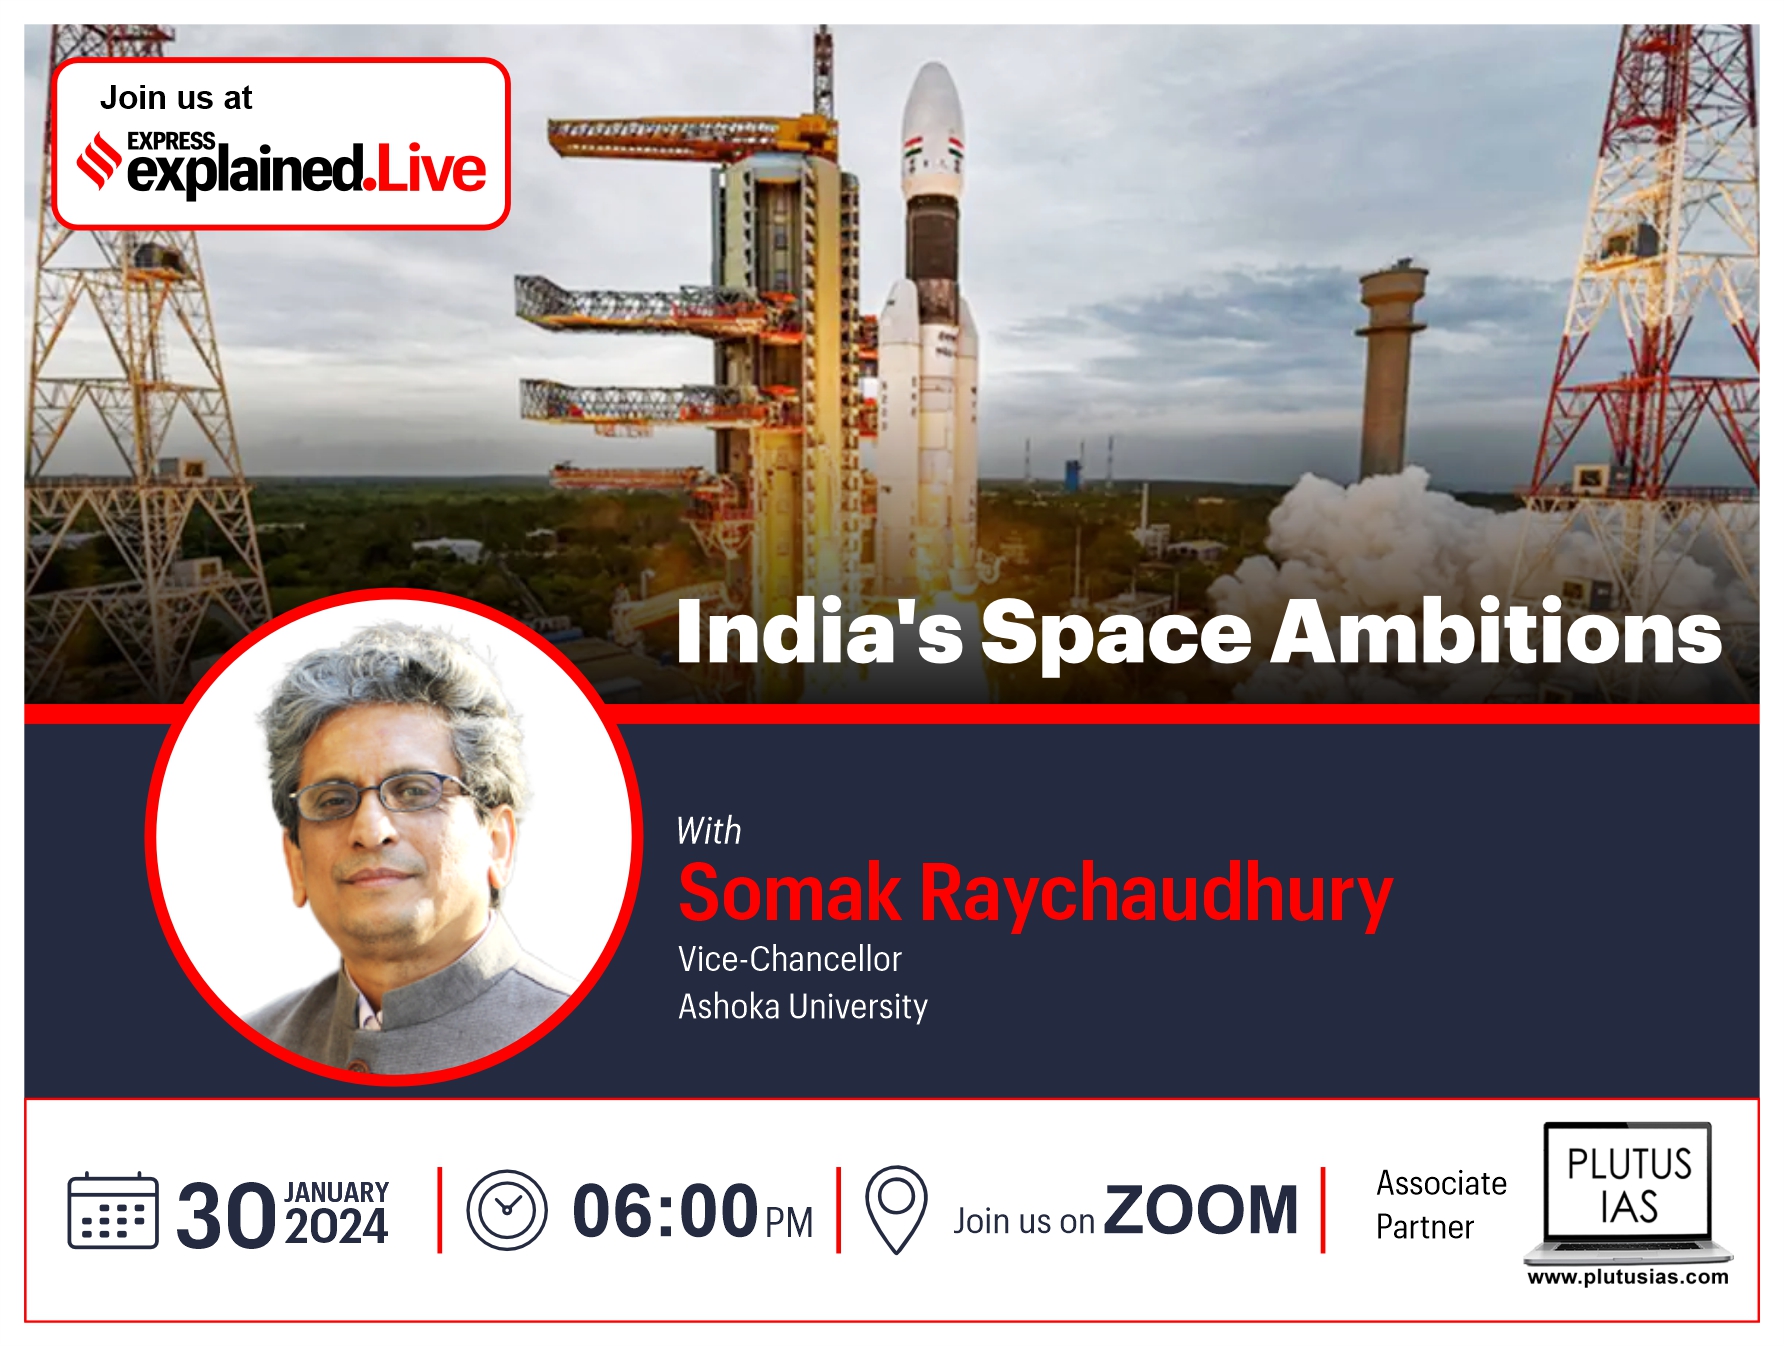 Explained Live event on India's space ambition